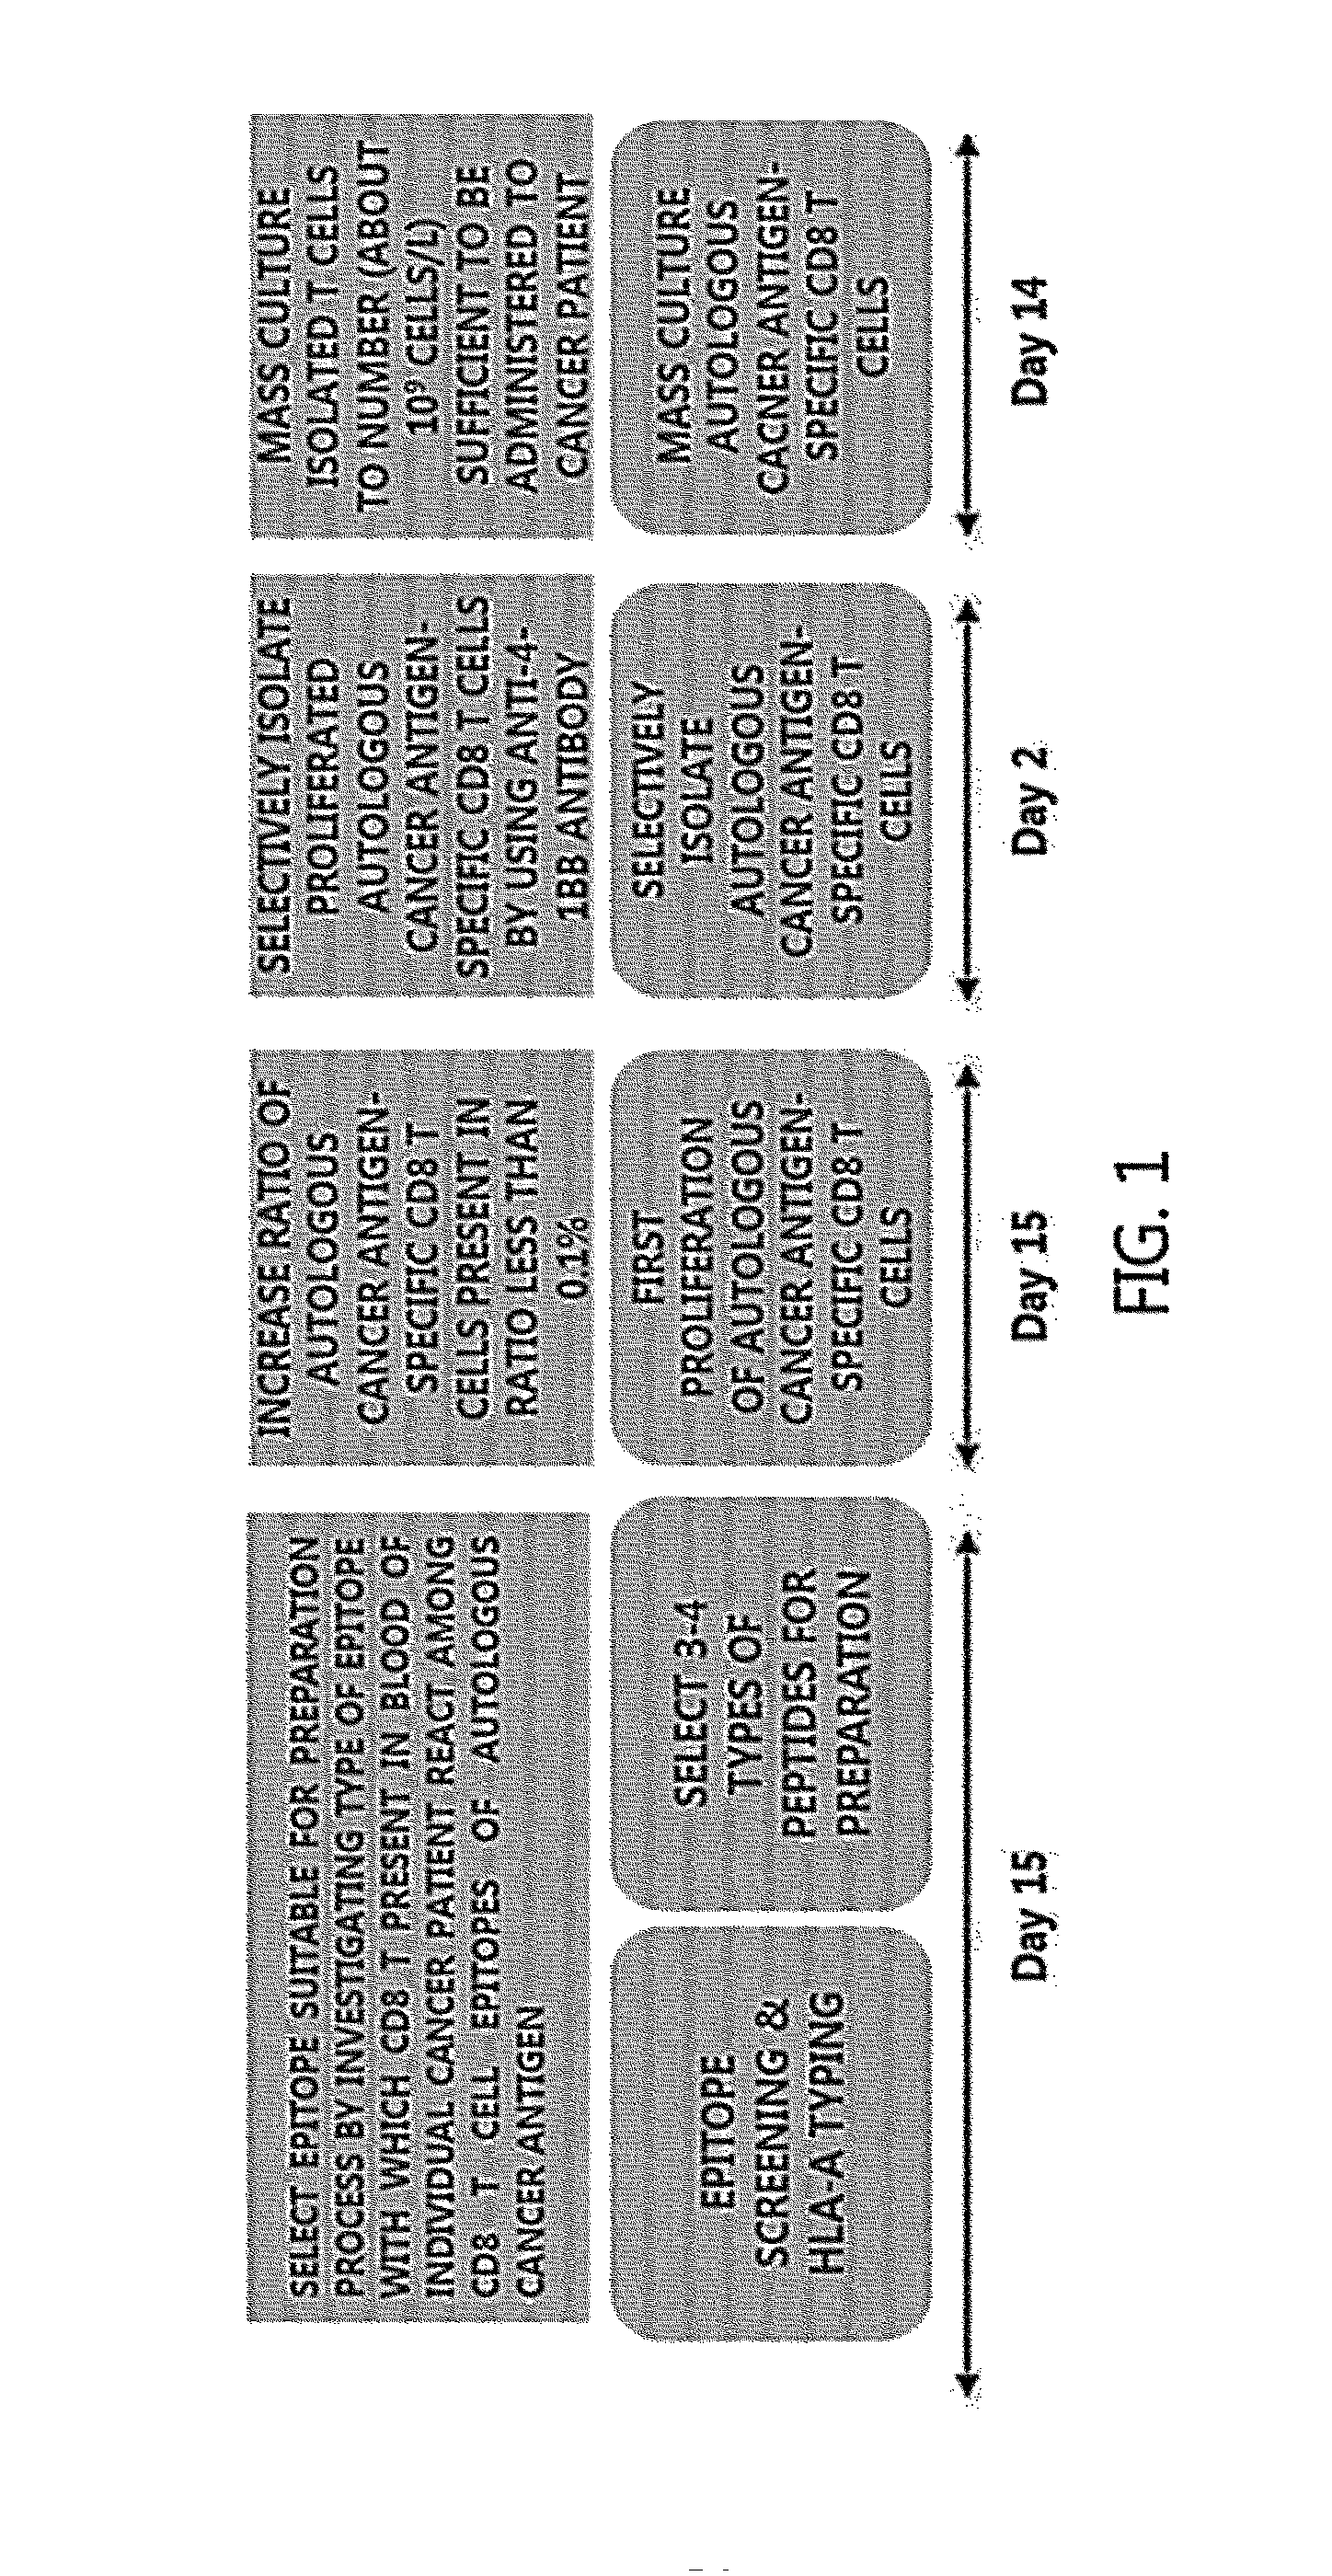 Methods for Isolating and Proliferating Autologous Cancer AntiGen-Specific CD8+ T Cells